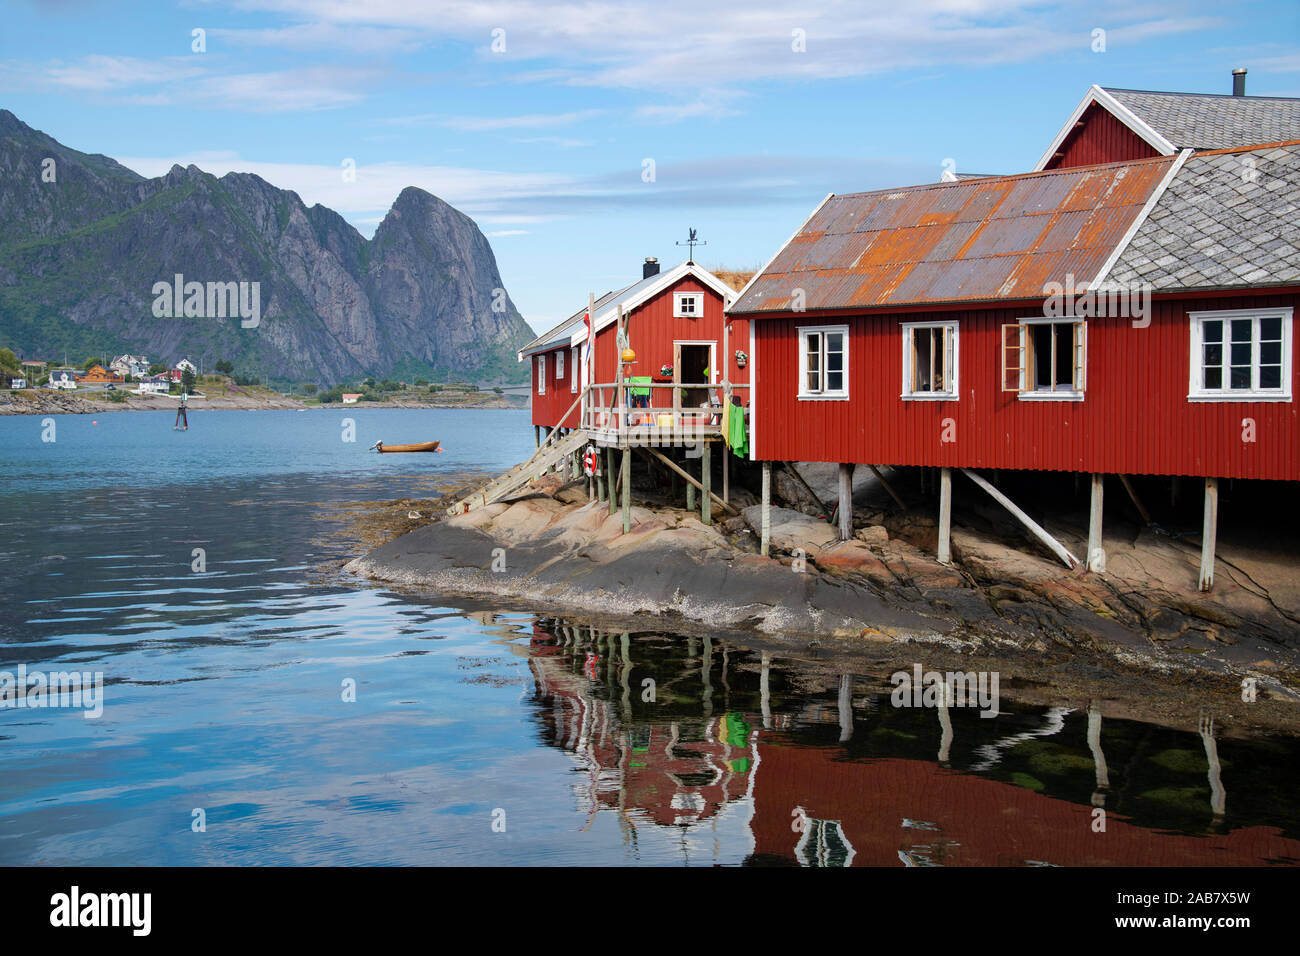 Rorbu, traditional fishermen's cabins now used for tourist accommodation in Reine, Moskenesoya, The Lofoten Islands, Norway, Europe Stock Photo